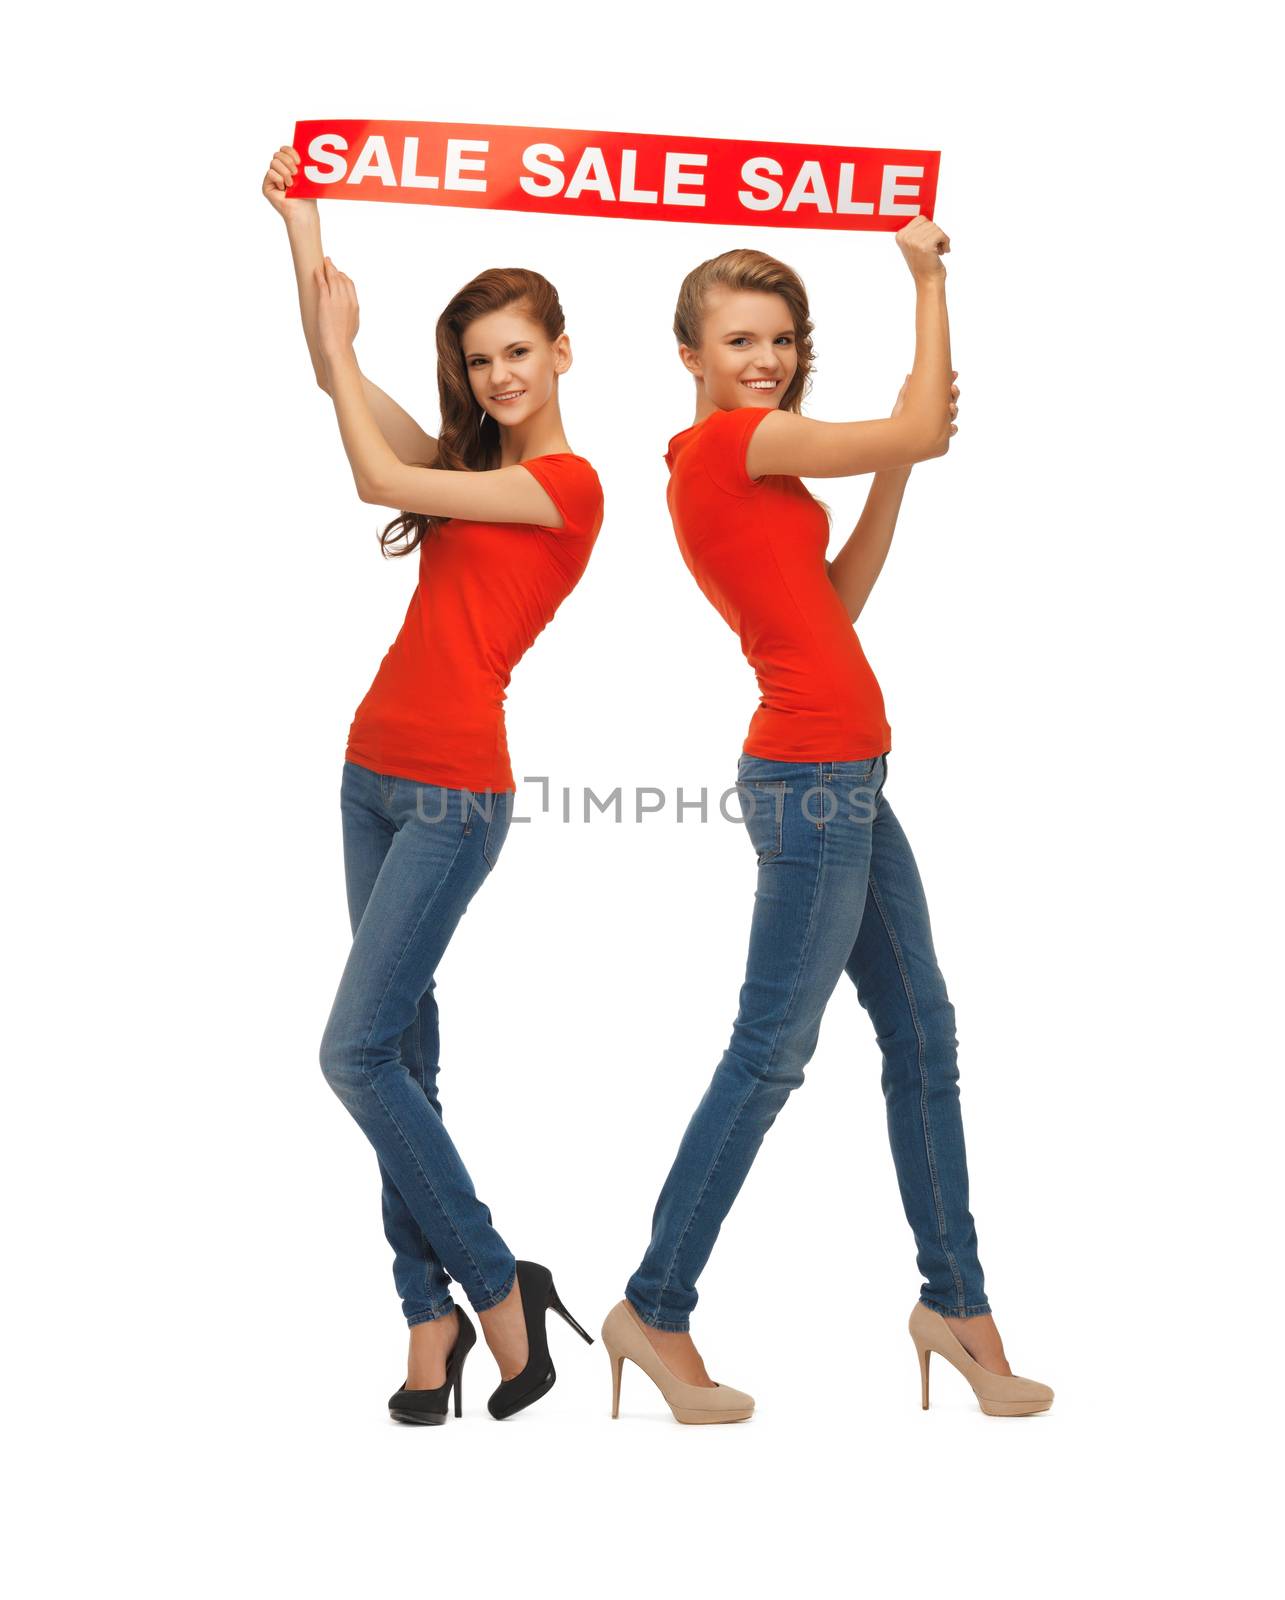 two teenage girls in red t-shirts with sale sign